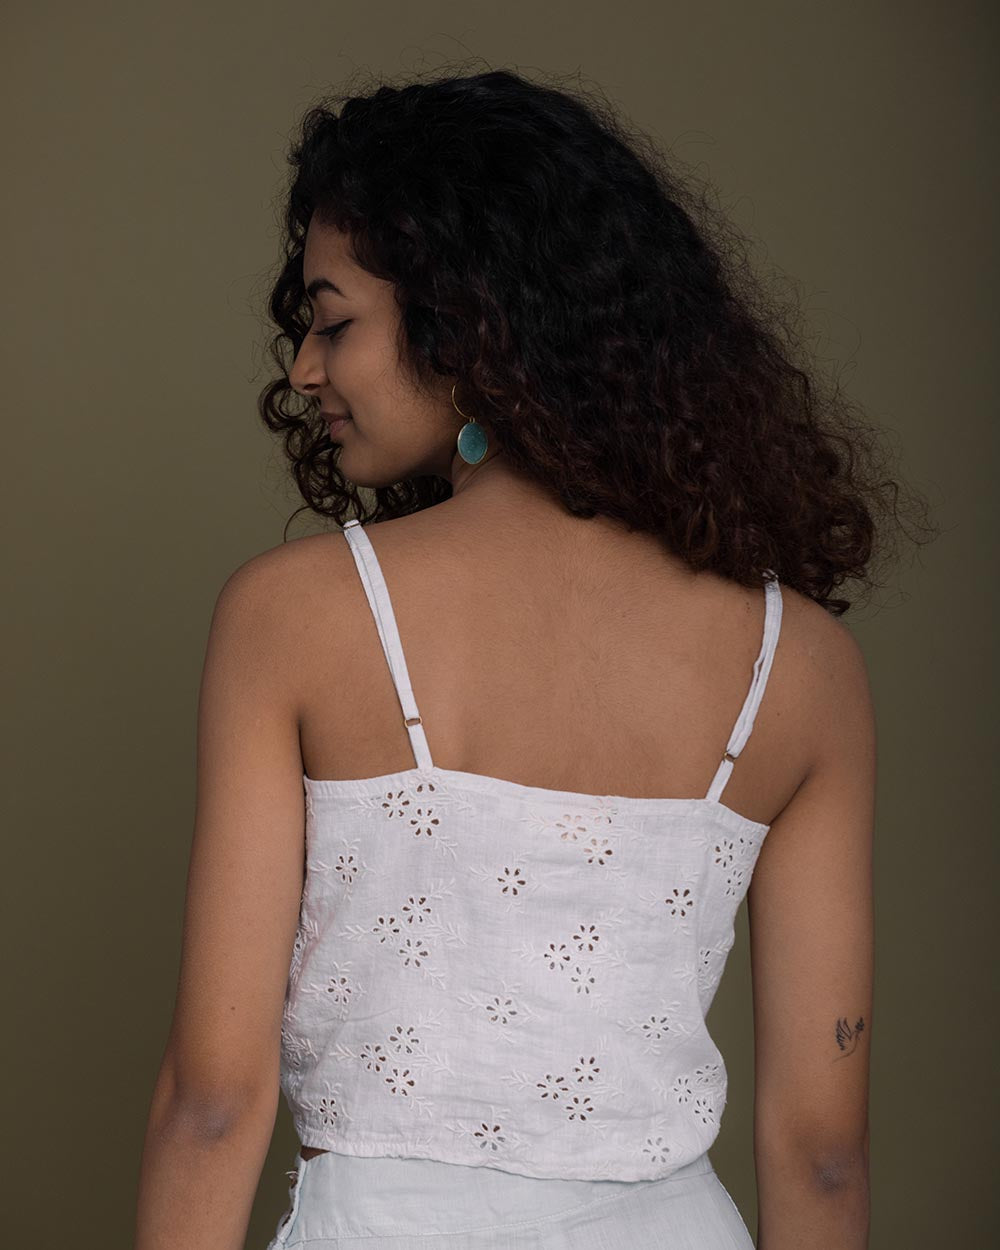 Poolday Tan Lines Top - Coconut White at Kamakhyaa by Reistor. This item is Casual Wear, Embroidered, Hemp, Natural, Spaghettis, Tops, White, Womenswear